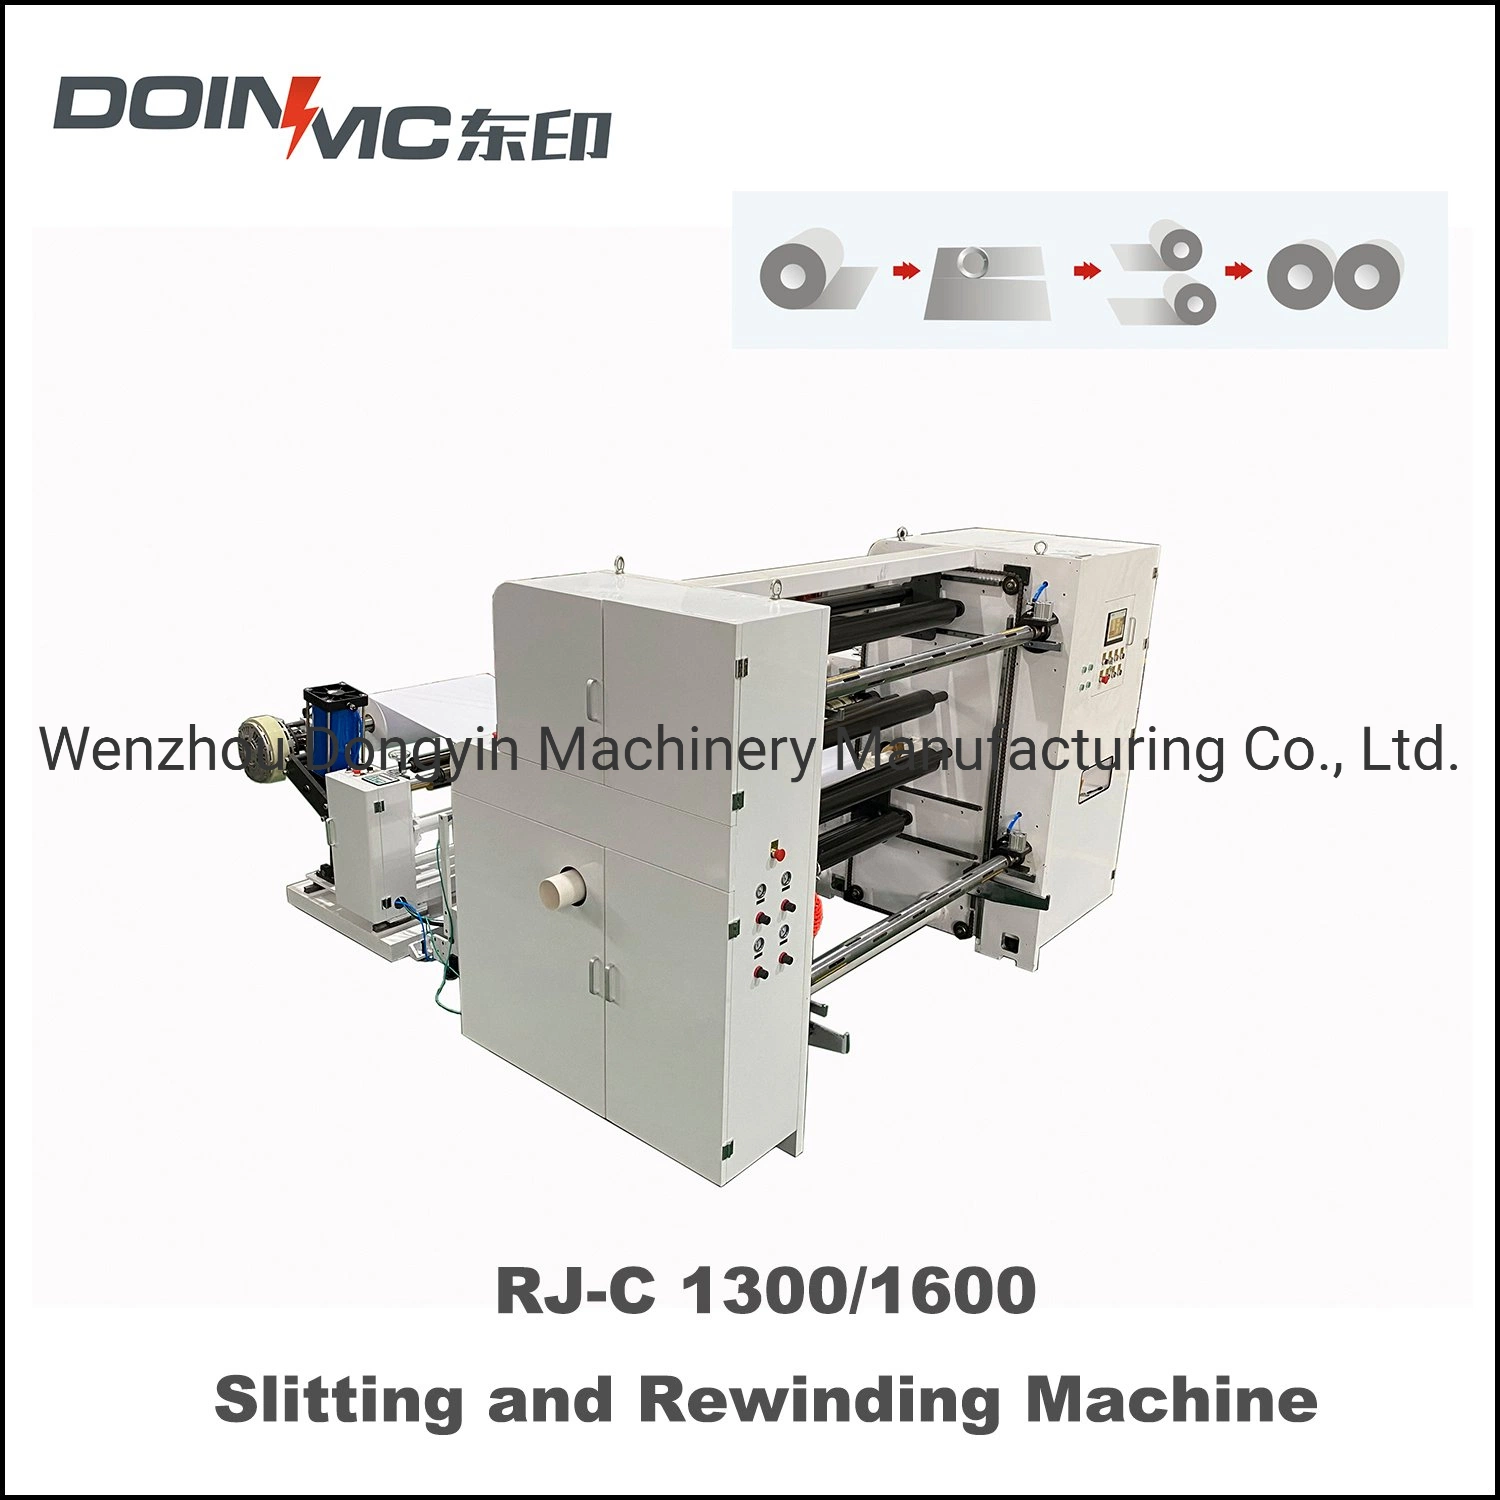 Three-Servo Motor Drive Automatic Tension Control Paper Bag Reel Slitting and Rewinding Machine Non-Woven Roll Slitter and Rewinder Machinery Price